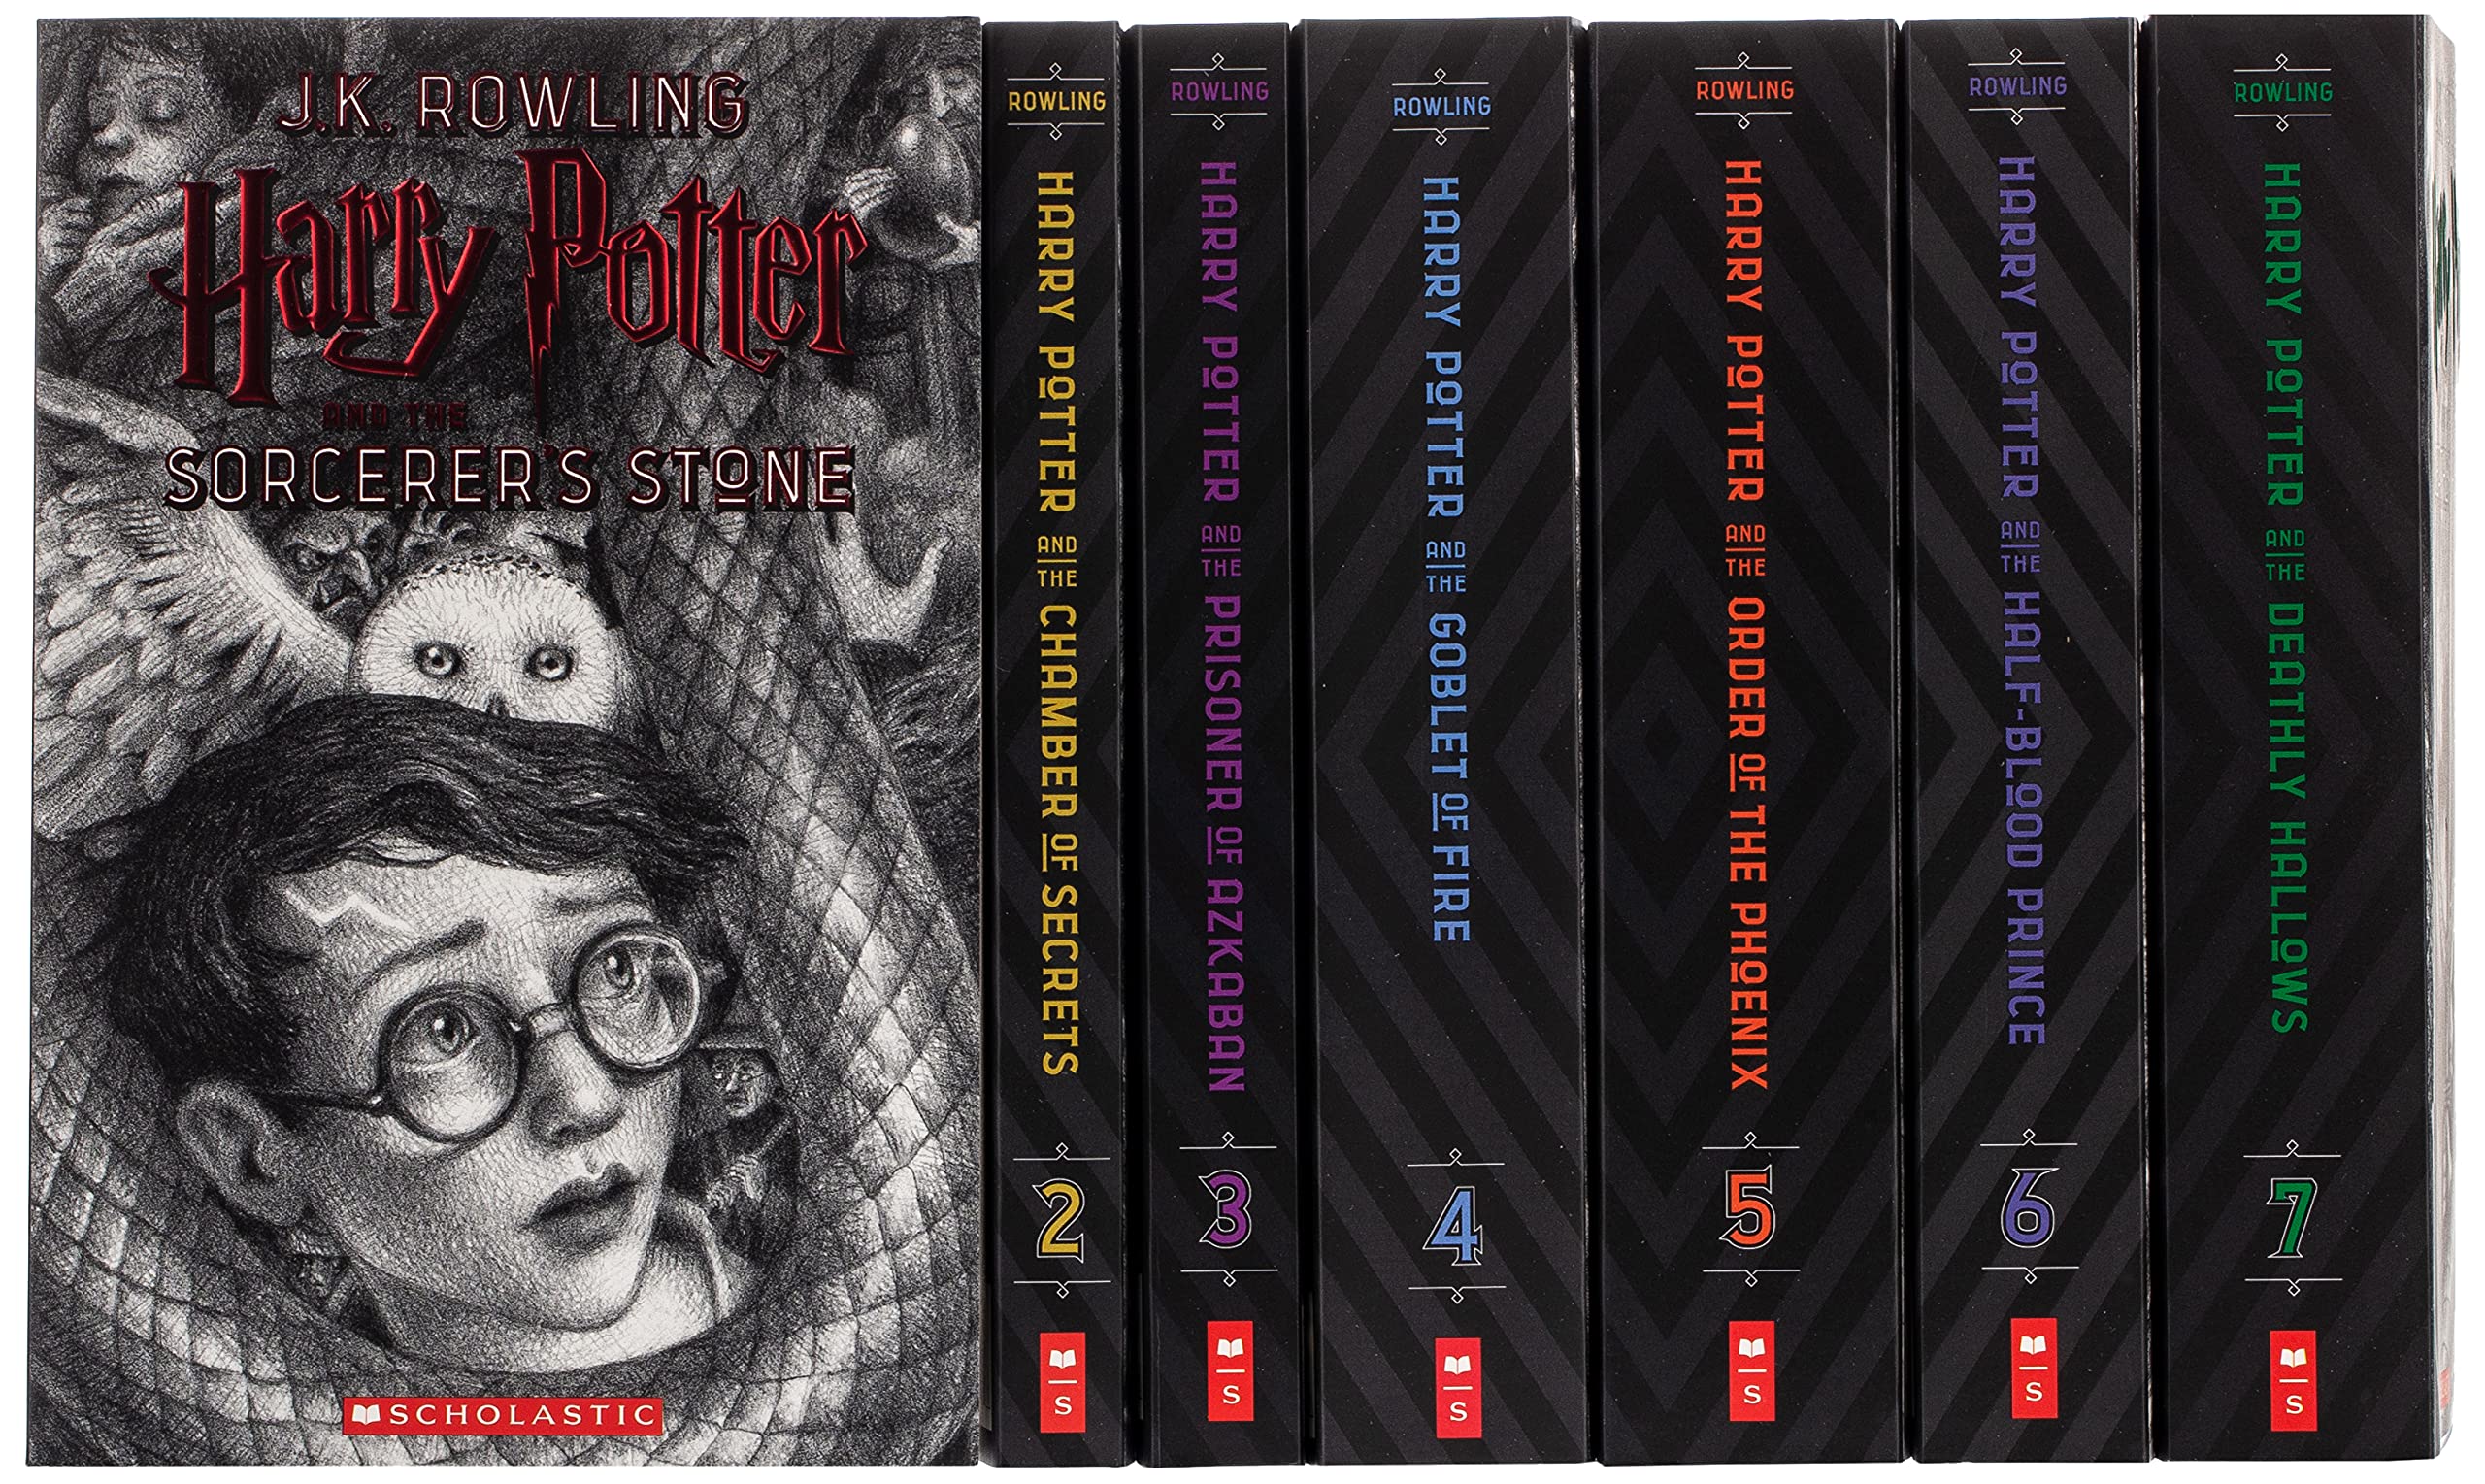 harry potter order of the phoenix book